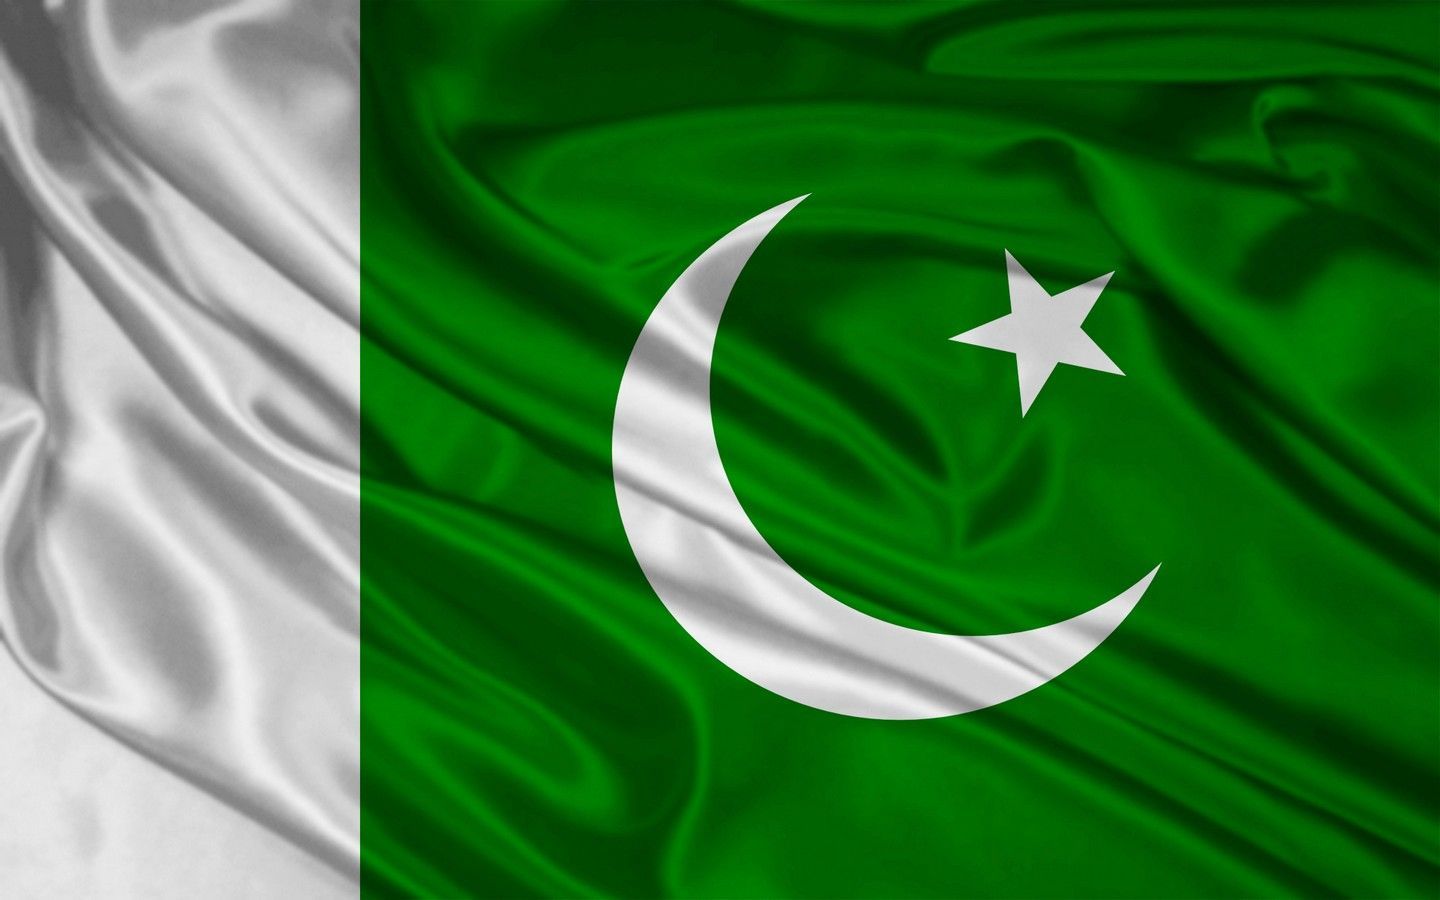 THE NATIONAL FLAG OF PAKISTAN! BEING AN ISLAMIC COUNTRY, THE GREEN IN THE FLAG REPRESENTS THE MAJORITY OF. Pakistan flag wallpaper, Pakistan flag, Pakistani flag